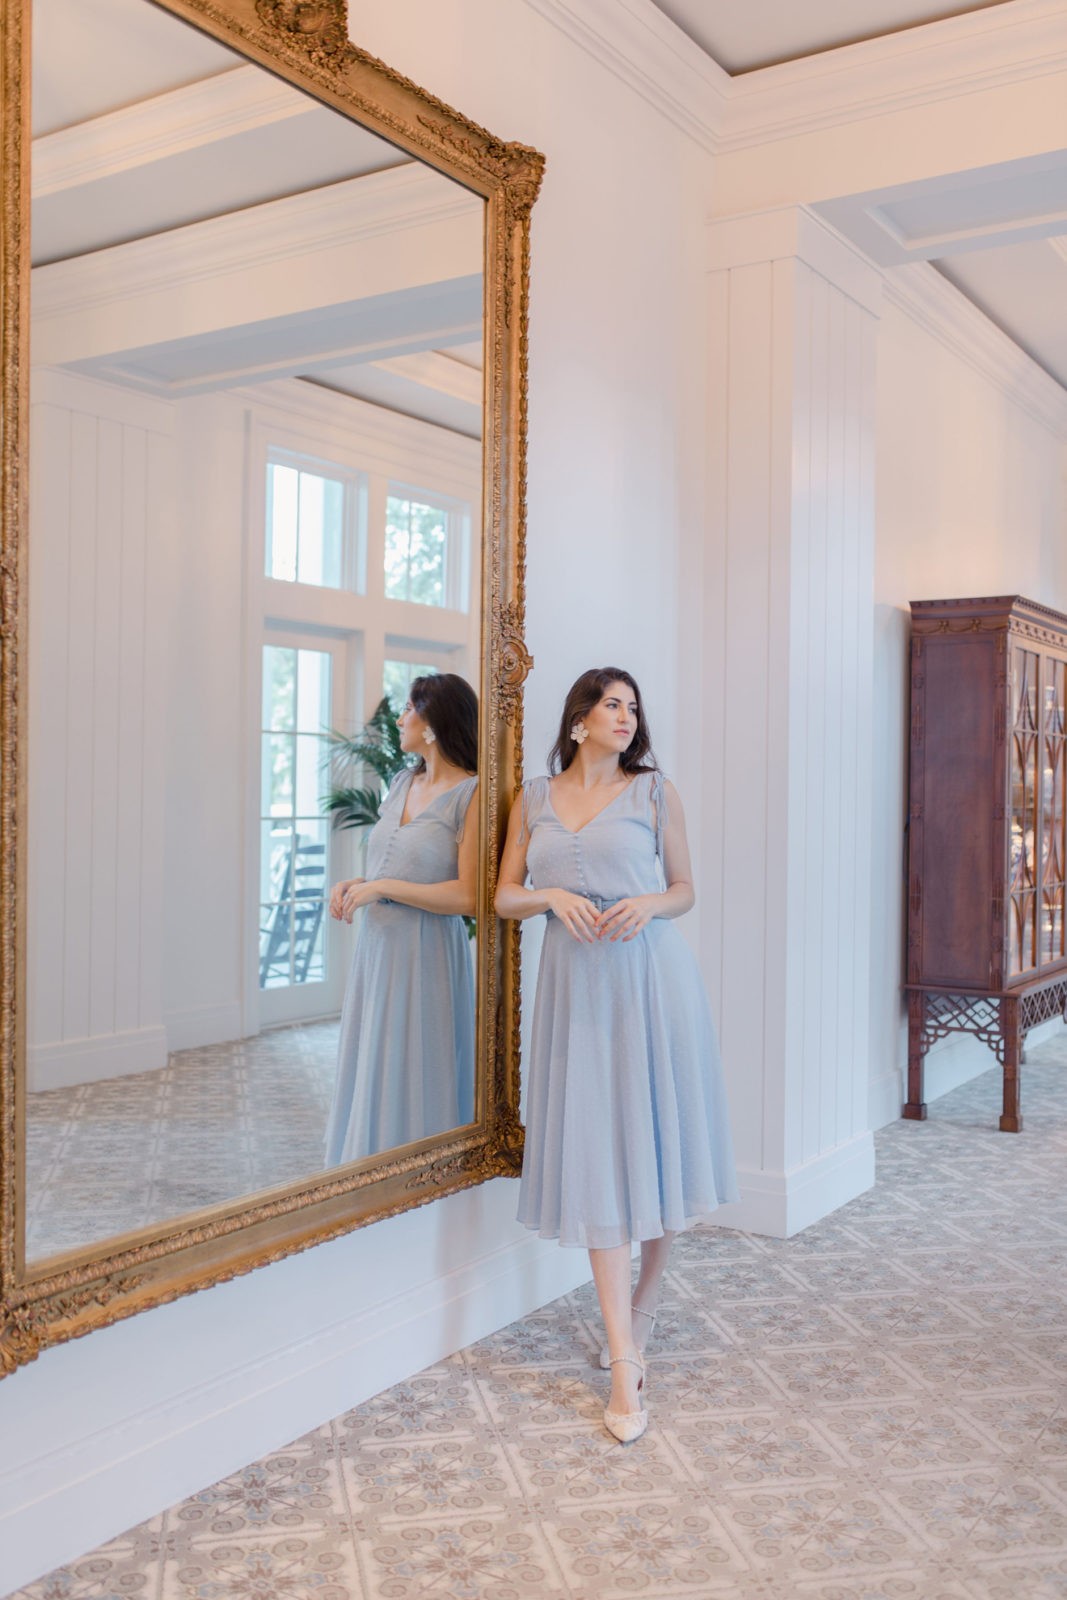 Montage Palmetto Bluff Resort Review by Luxury Travel Blogger Laura Lily: image of a woman in a light blue dress standing next to a large ornate gold framed mirror.